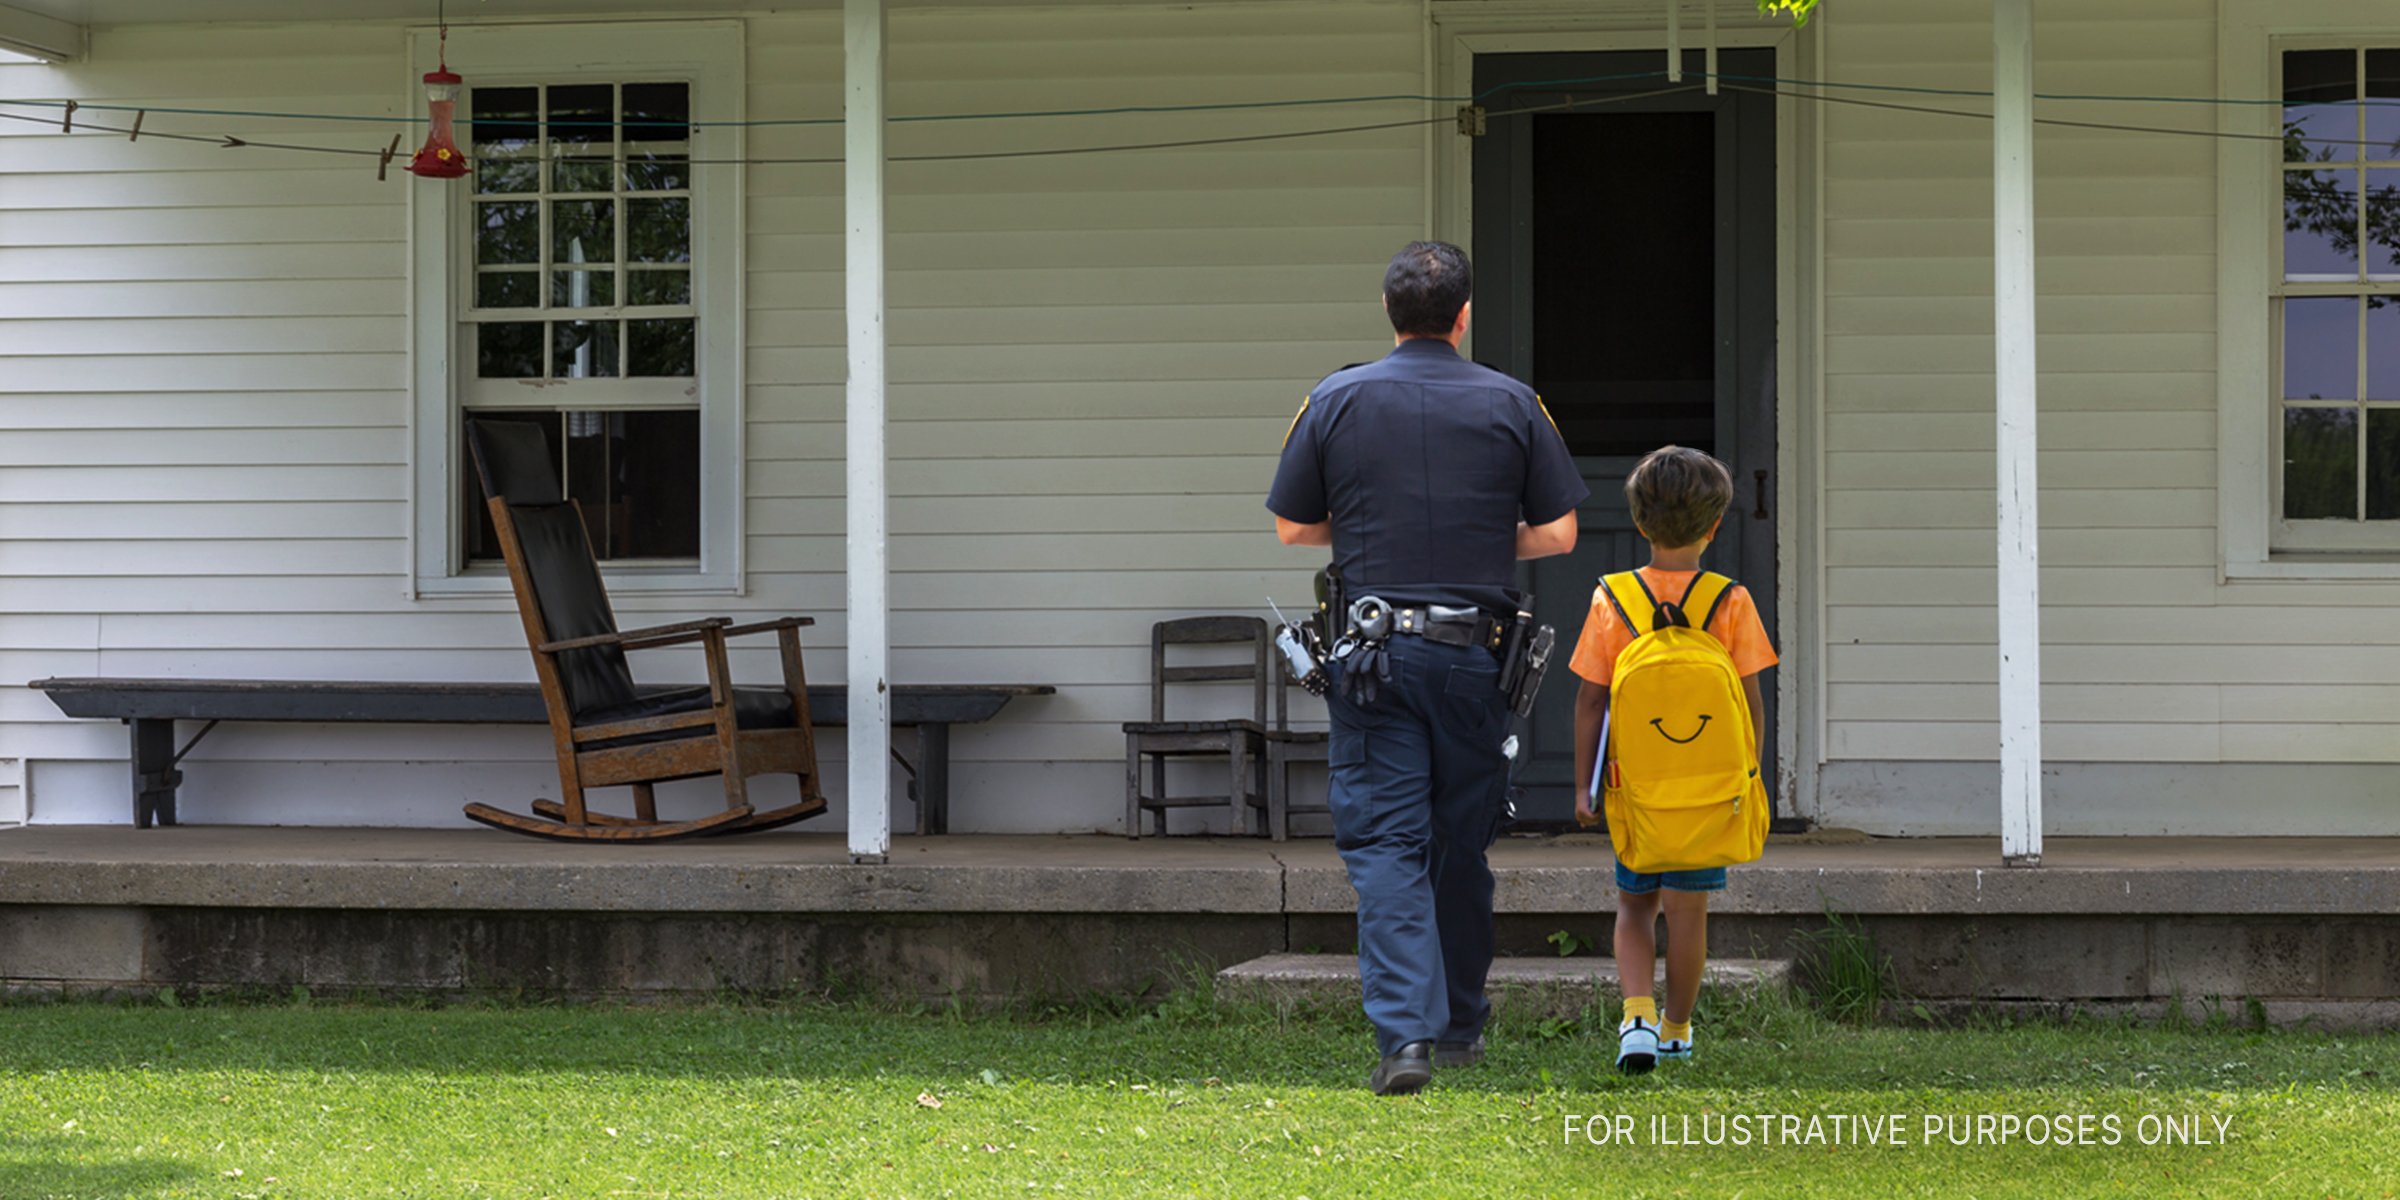 Young boy and policeman walk towards a house | Source: Shutterstock